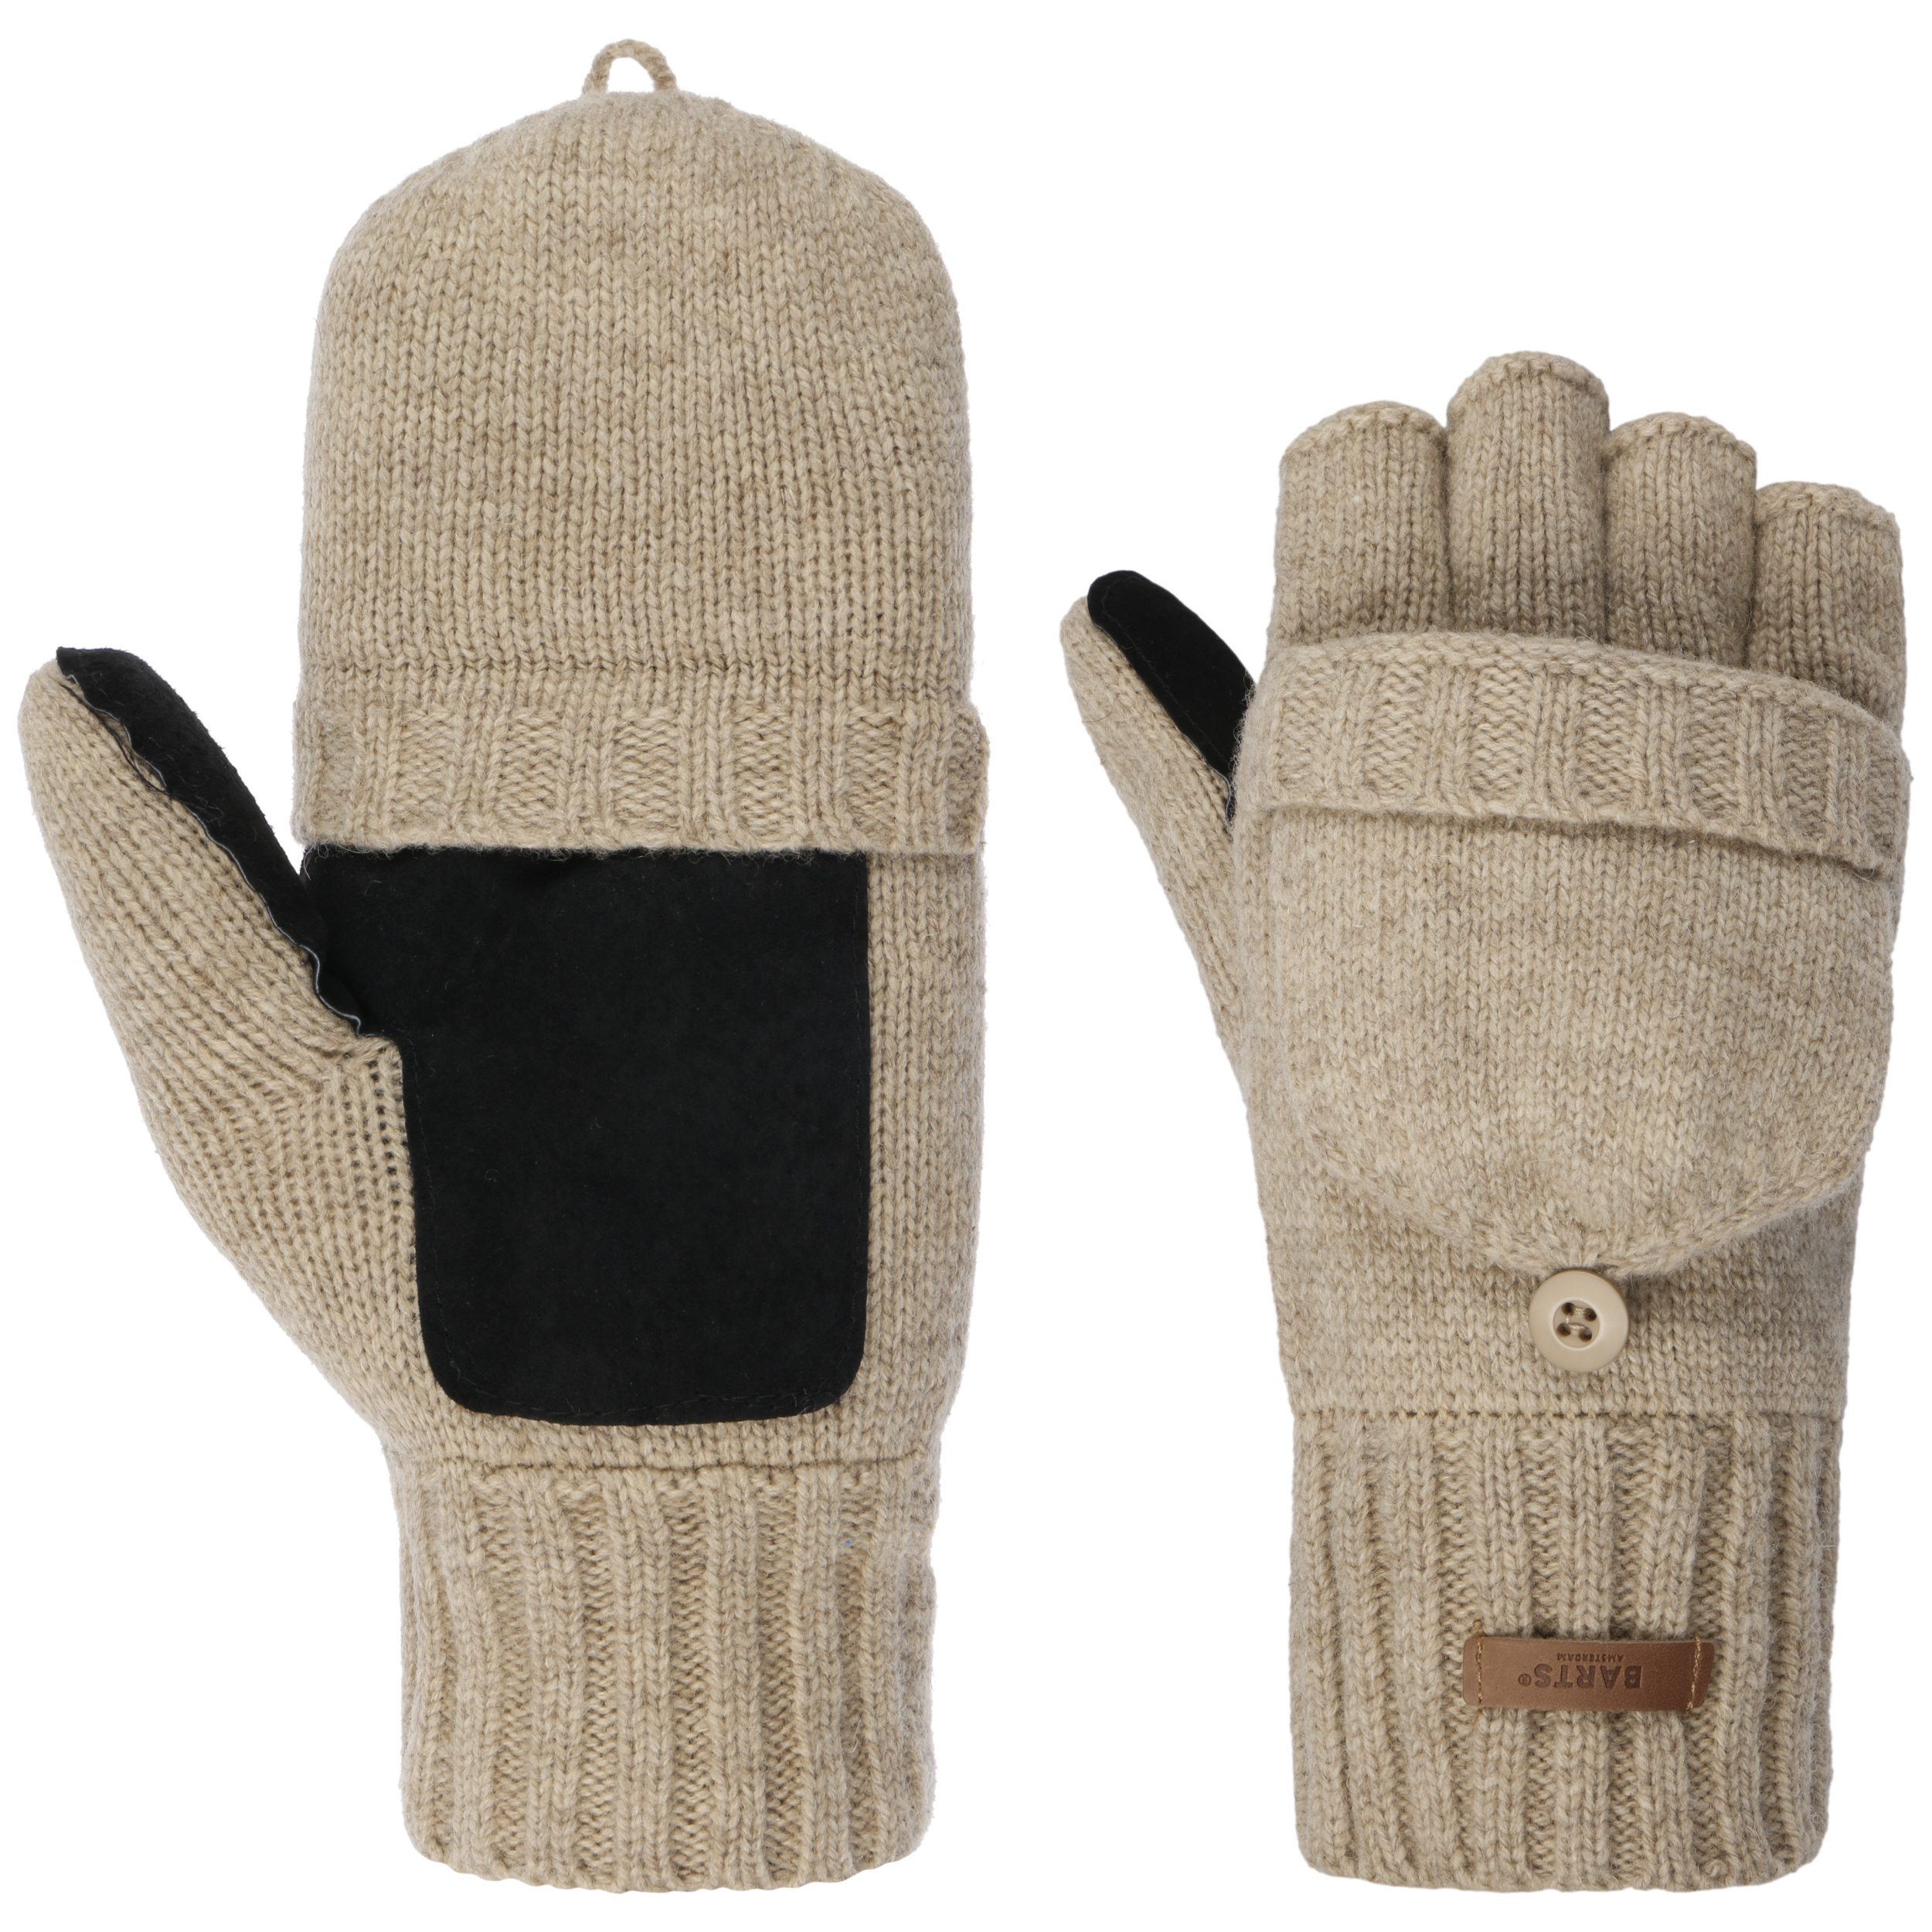 Mitaine convertible laine doublée Sherpa homme